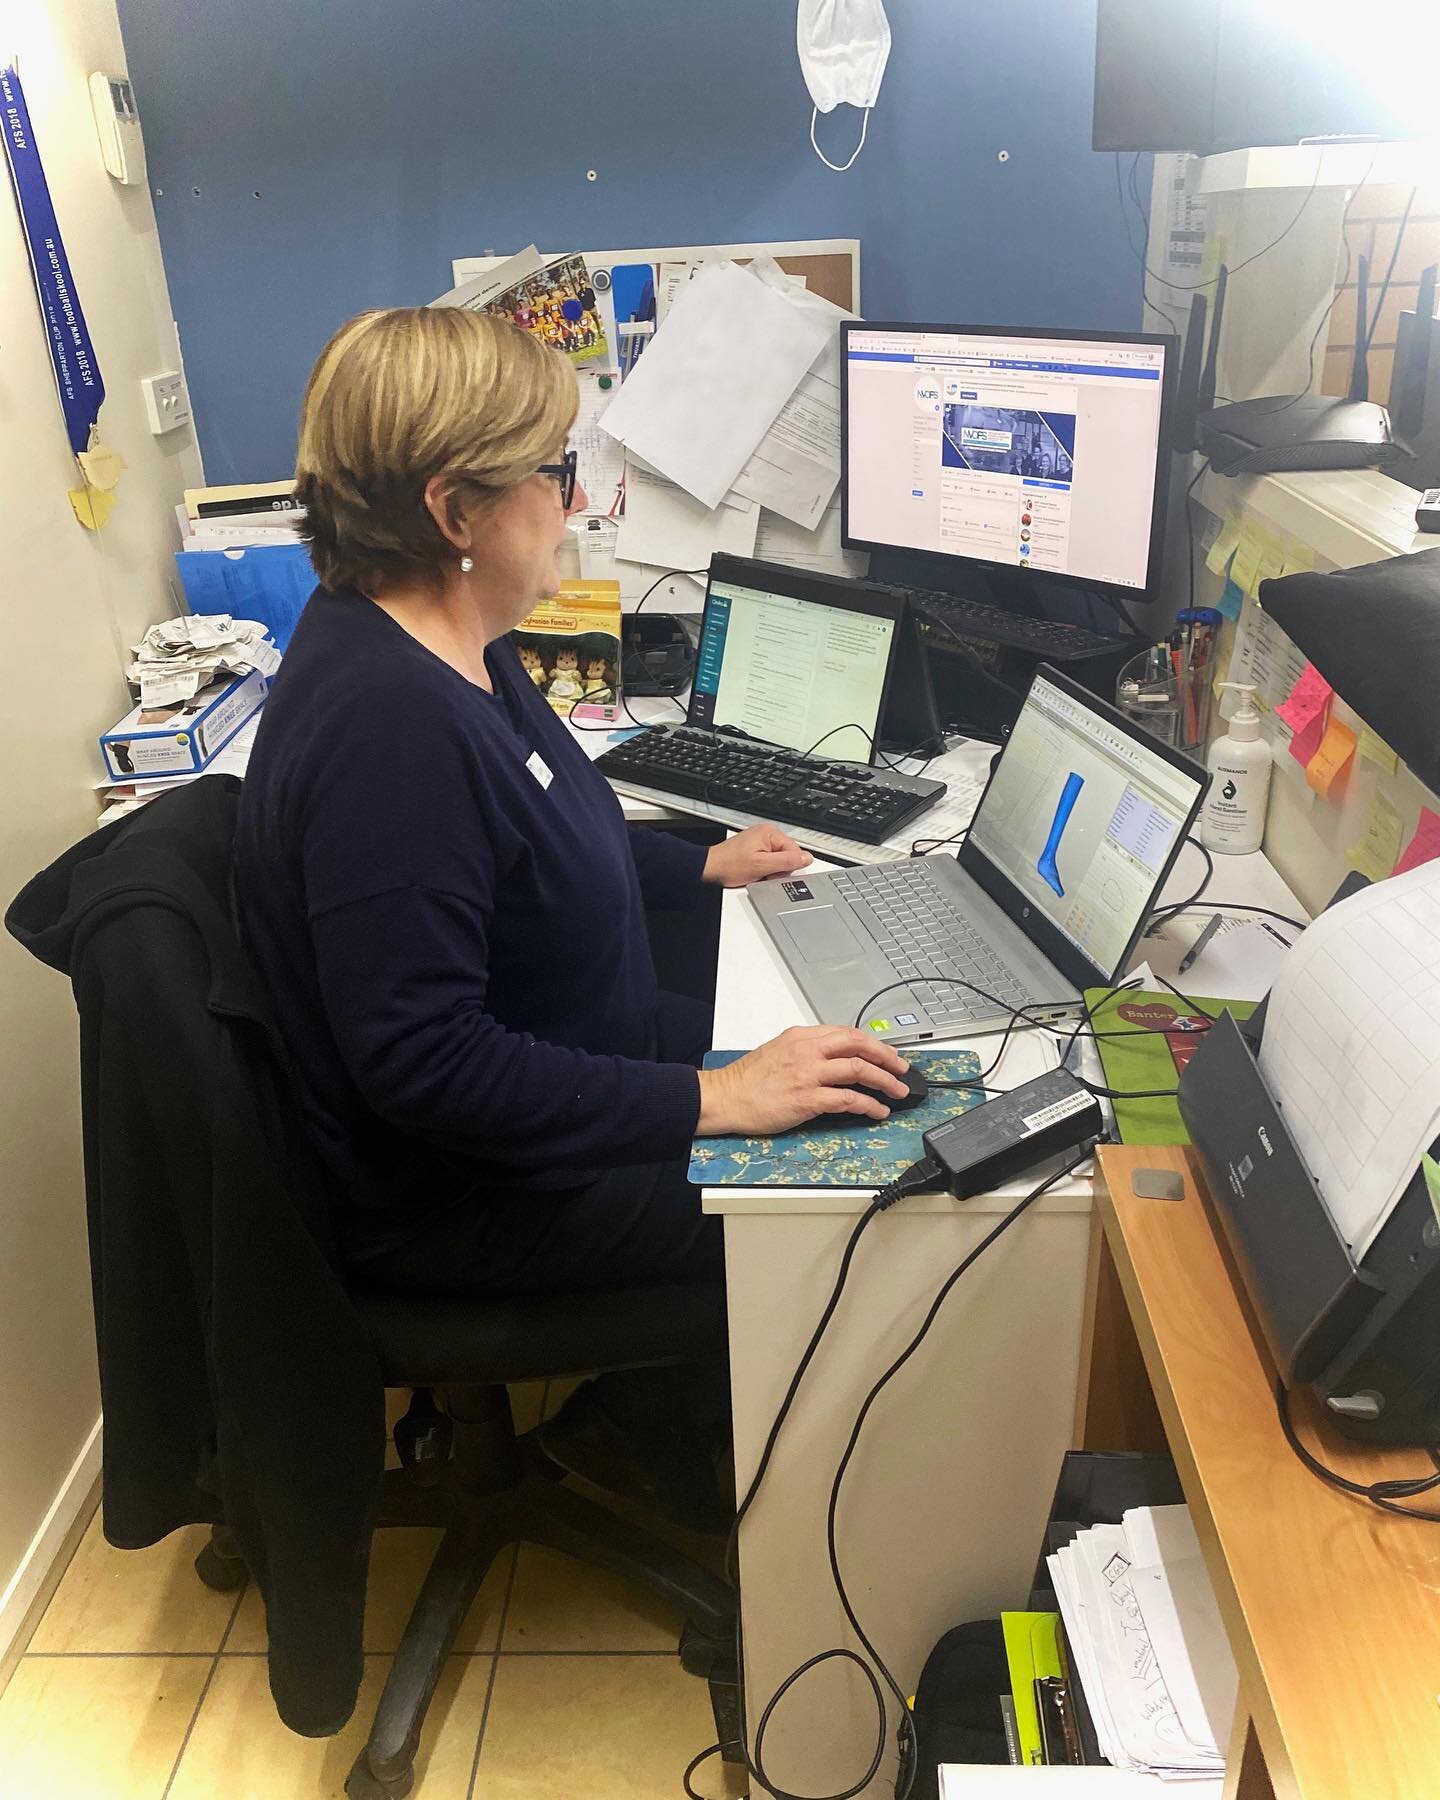 Lynne doing what she does - do you think she needs another screen?
@cliniko @vorumrc  #orthotist #orthoticsandprosthetics #3jobsatonce #screentime